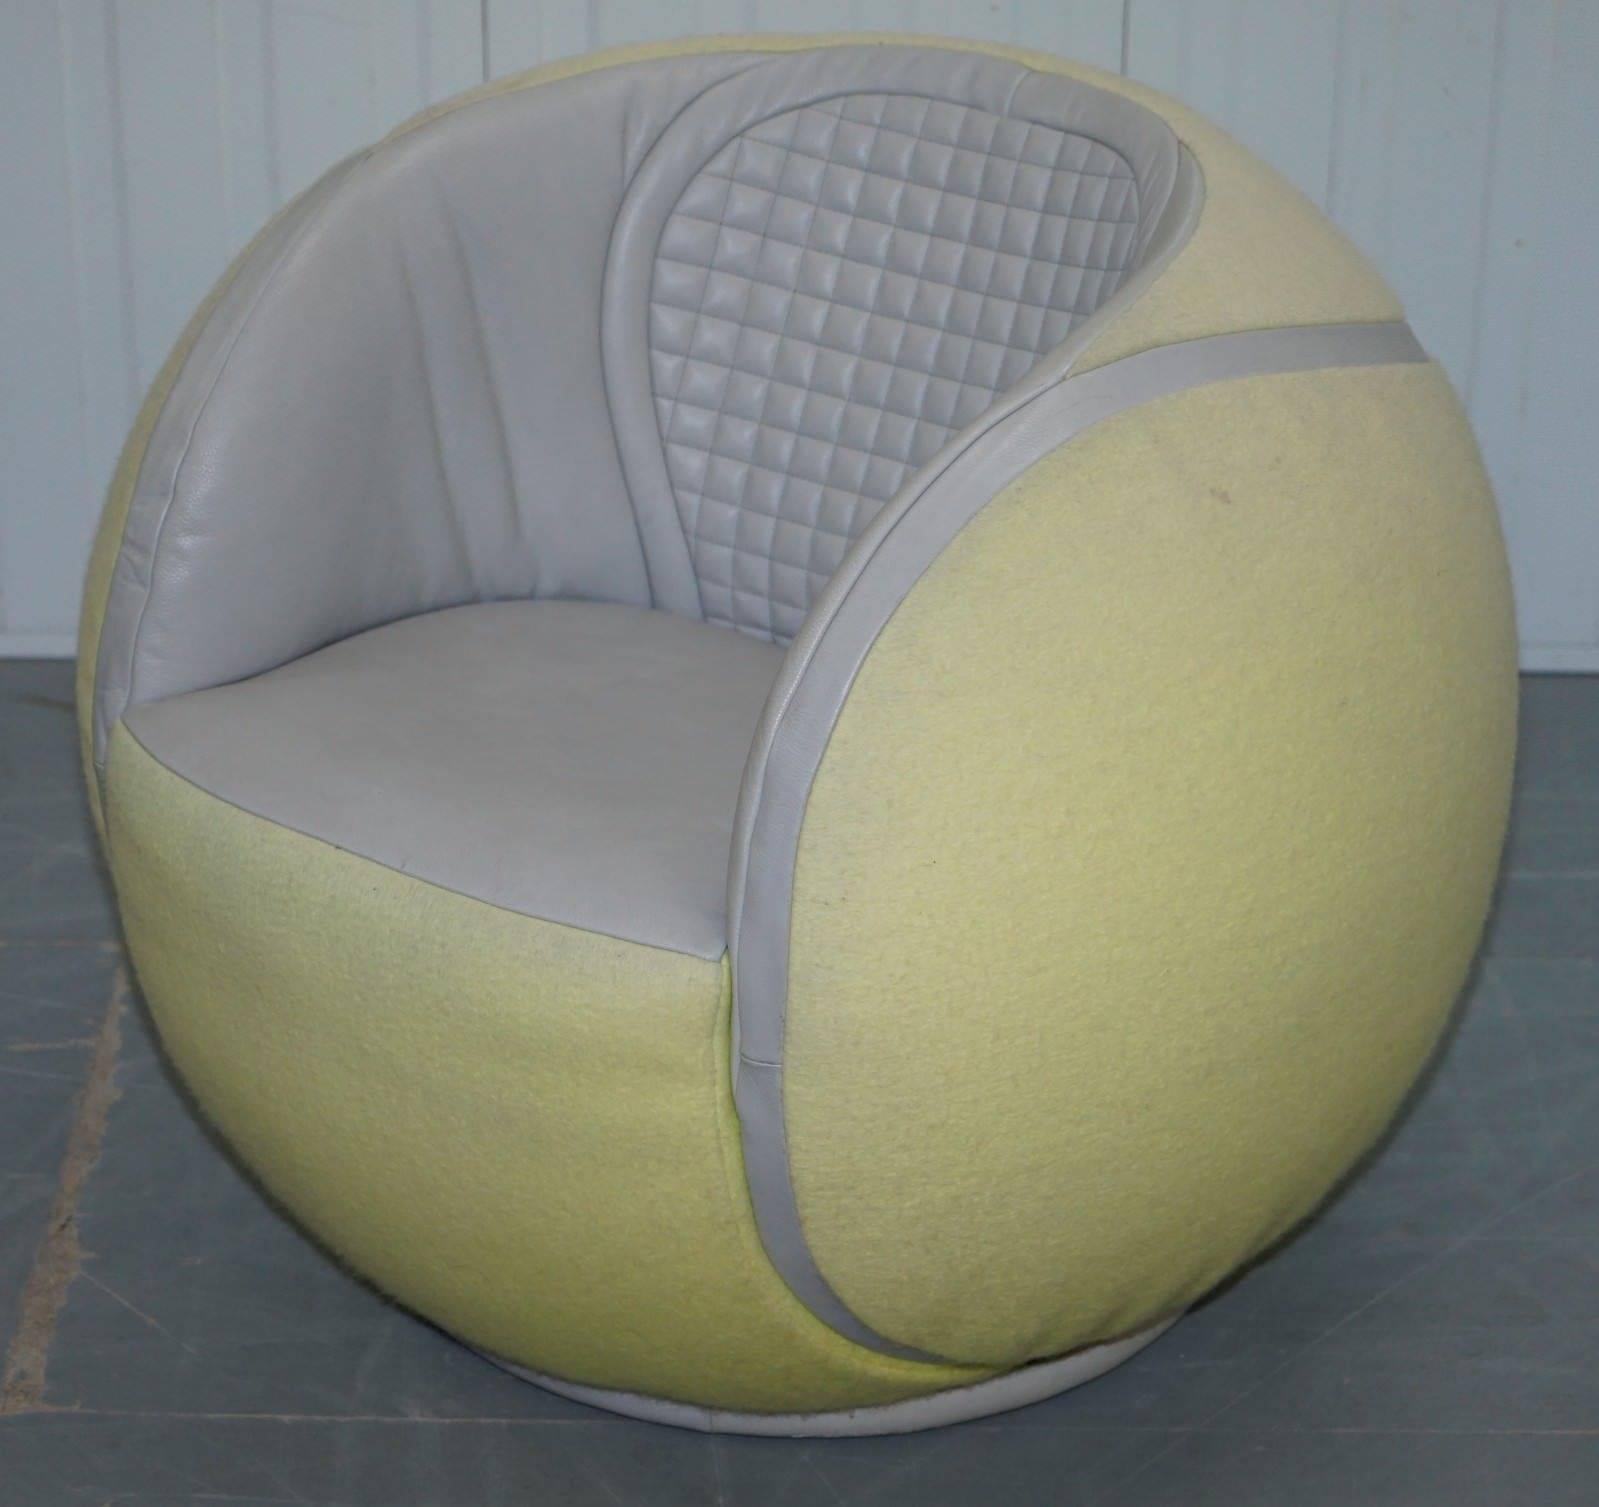 We are delighted to offer for sale this must have for any sports room De Sede 1985 Zurich open tennis ball armchair

A very rare and early find, this is one of the original period used pieces and not later reproduction chairs, this model was only